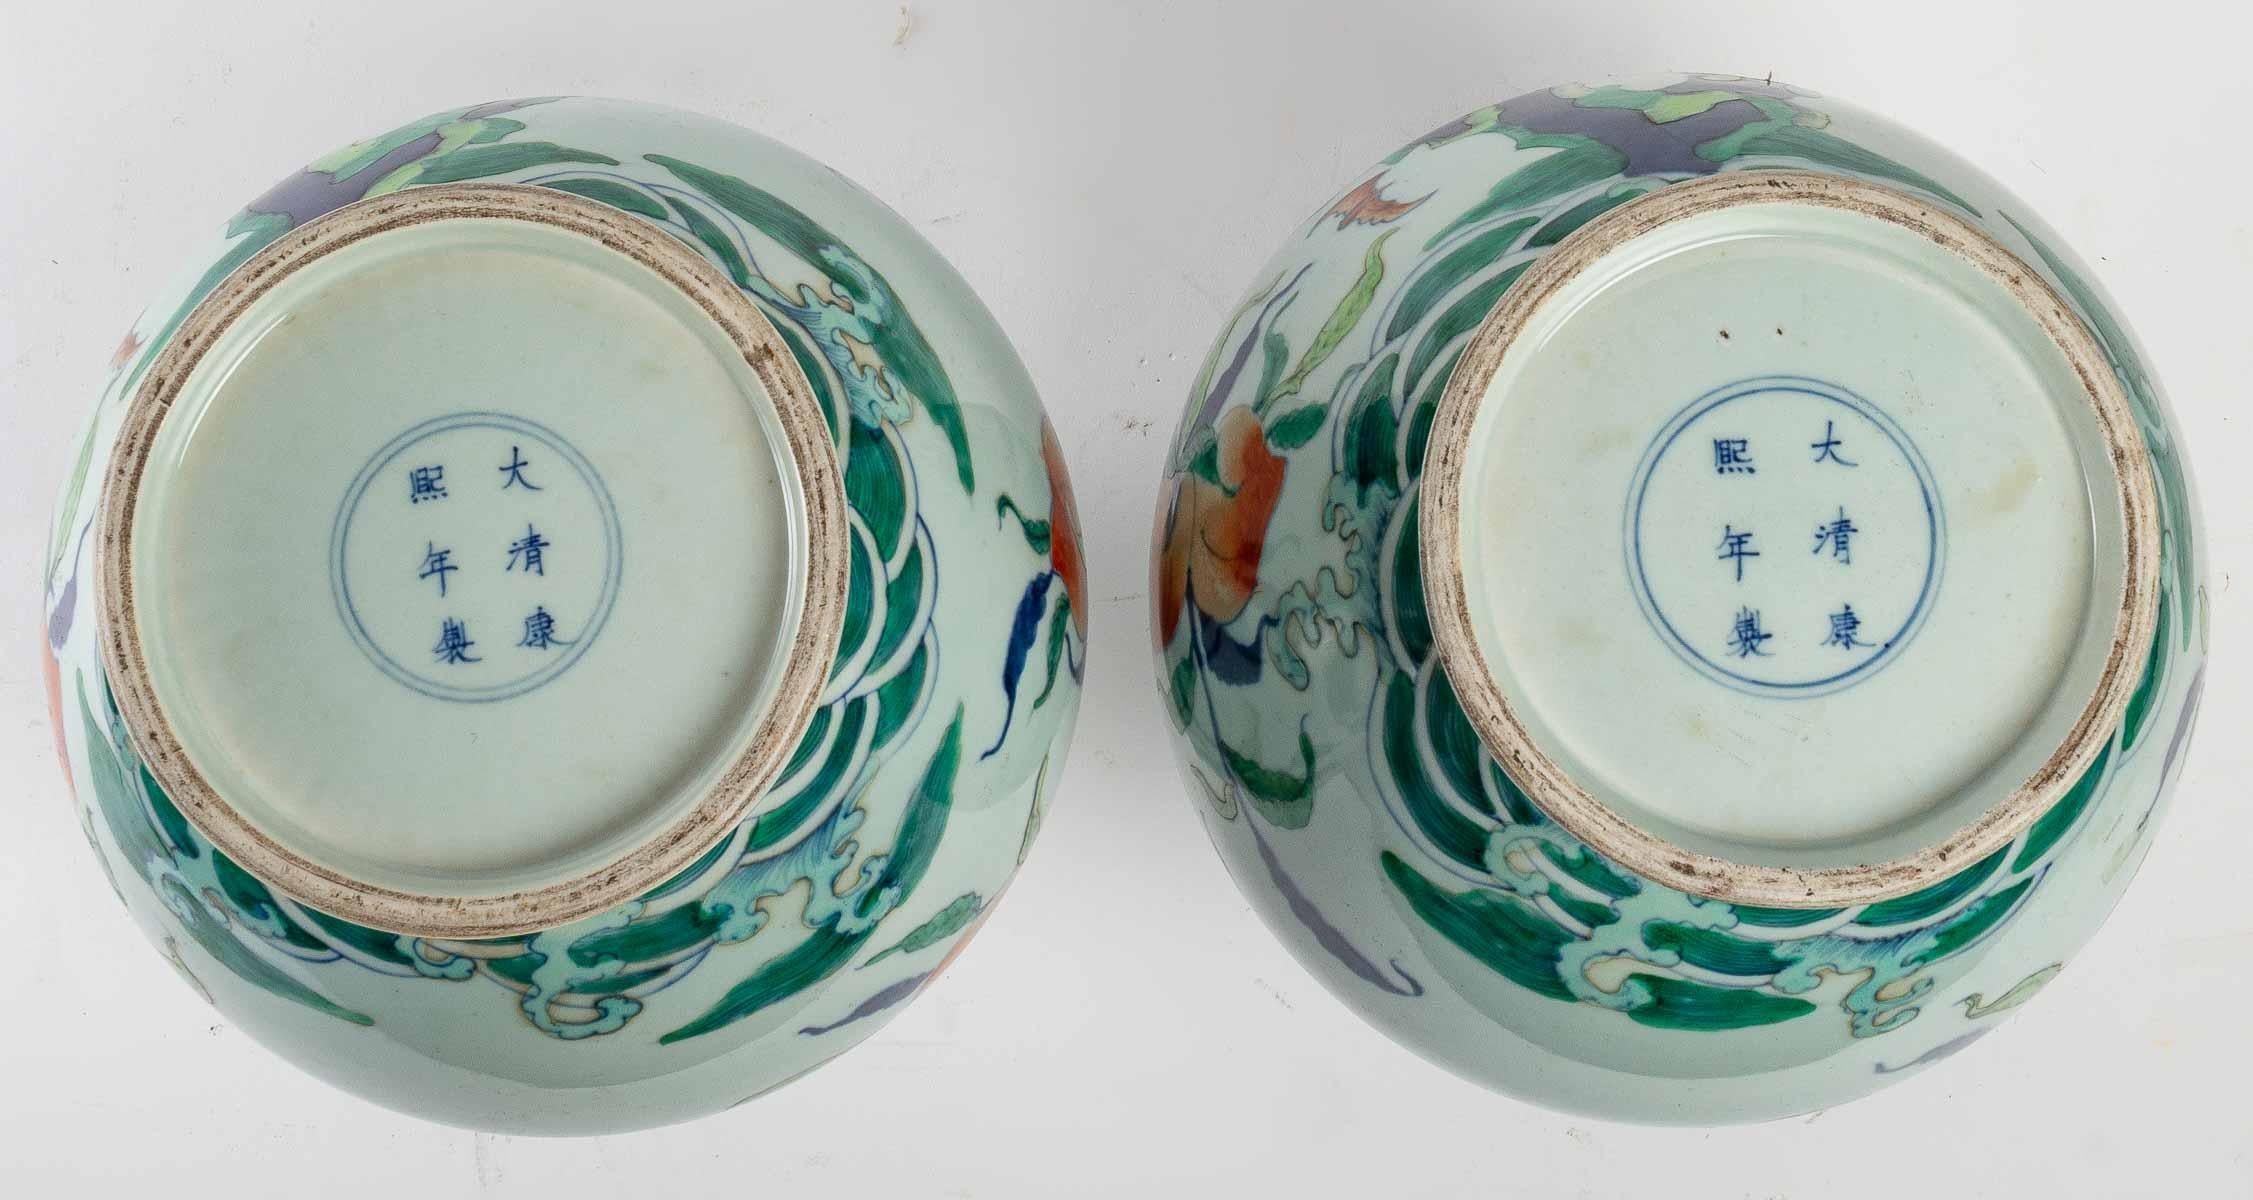 Porcelain Pair of Vases with Peach of Longevity Decoration